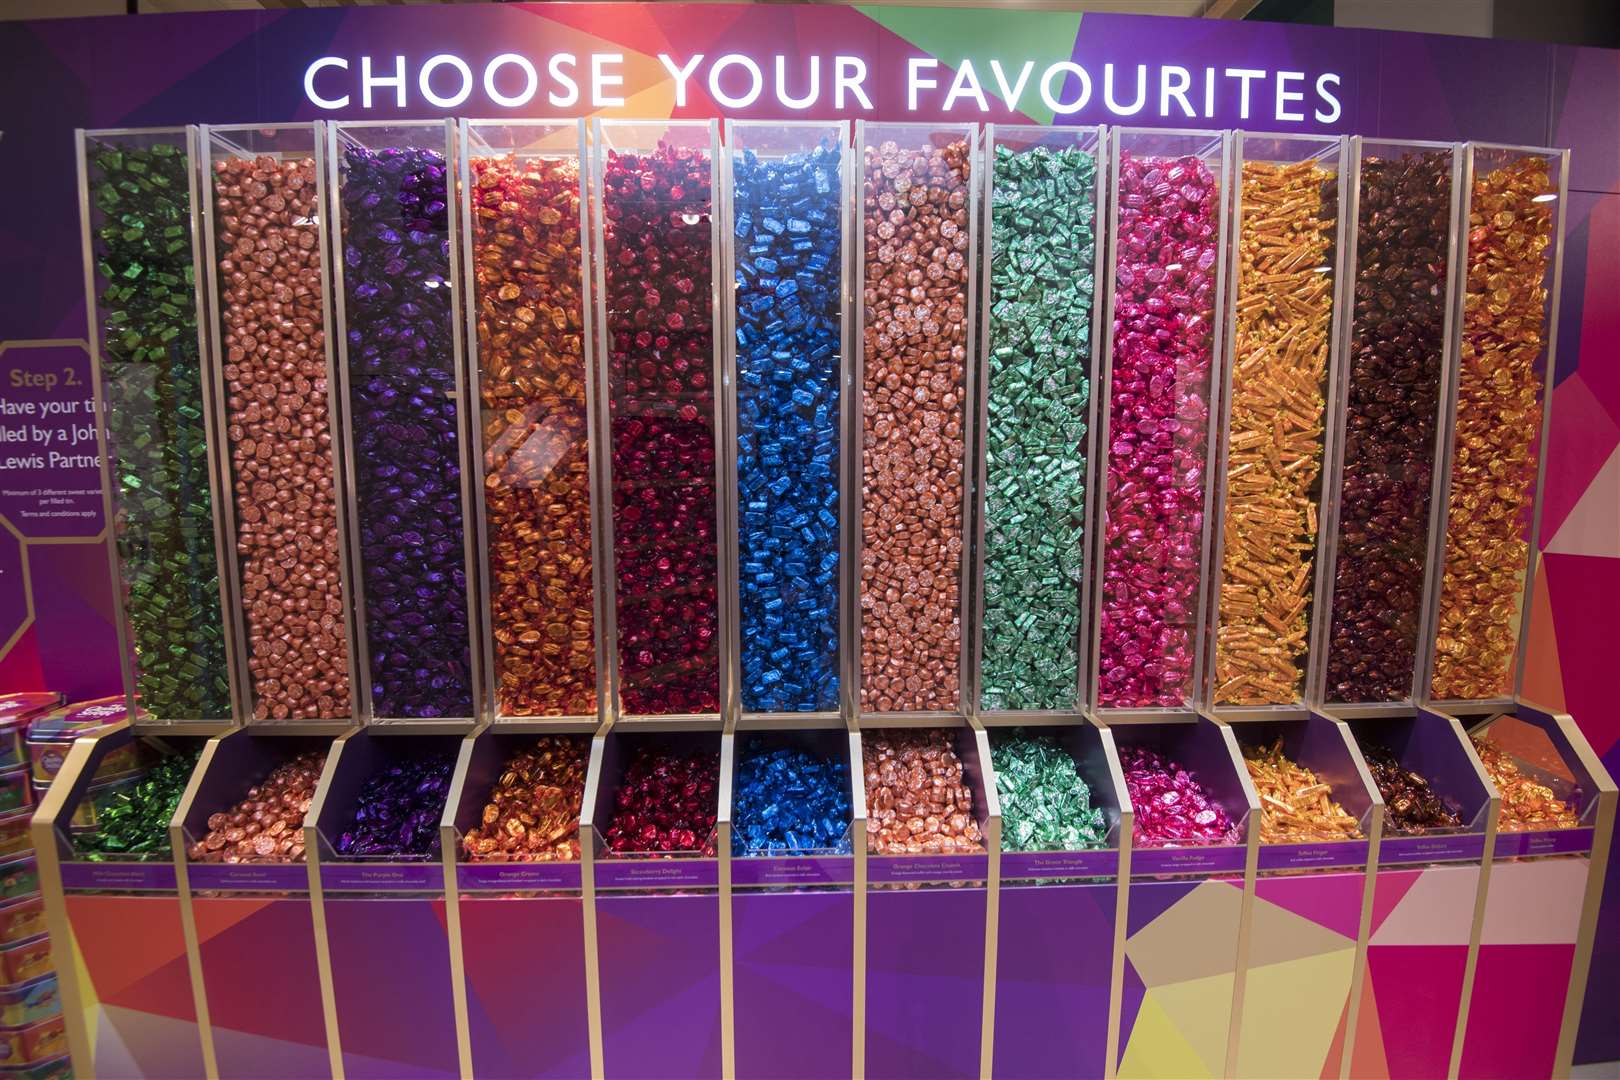 The Quality Street pick n' mix option won't be in John Lewis stores this Christmas